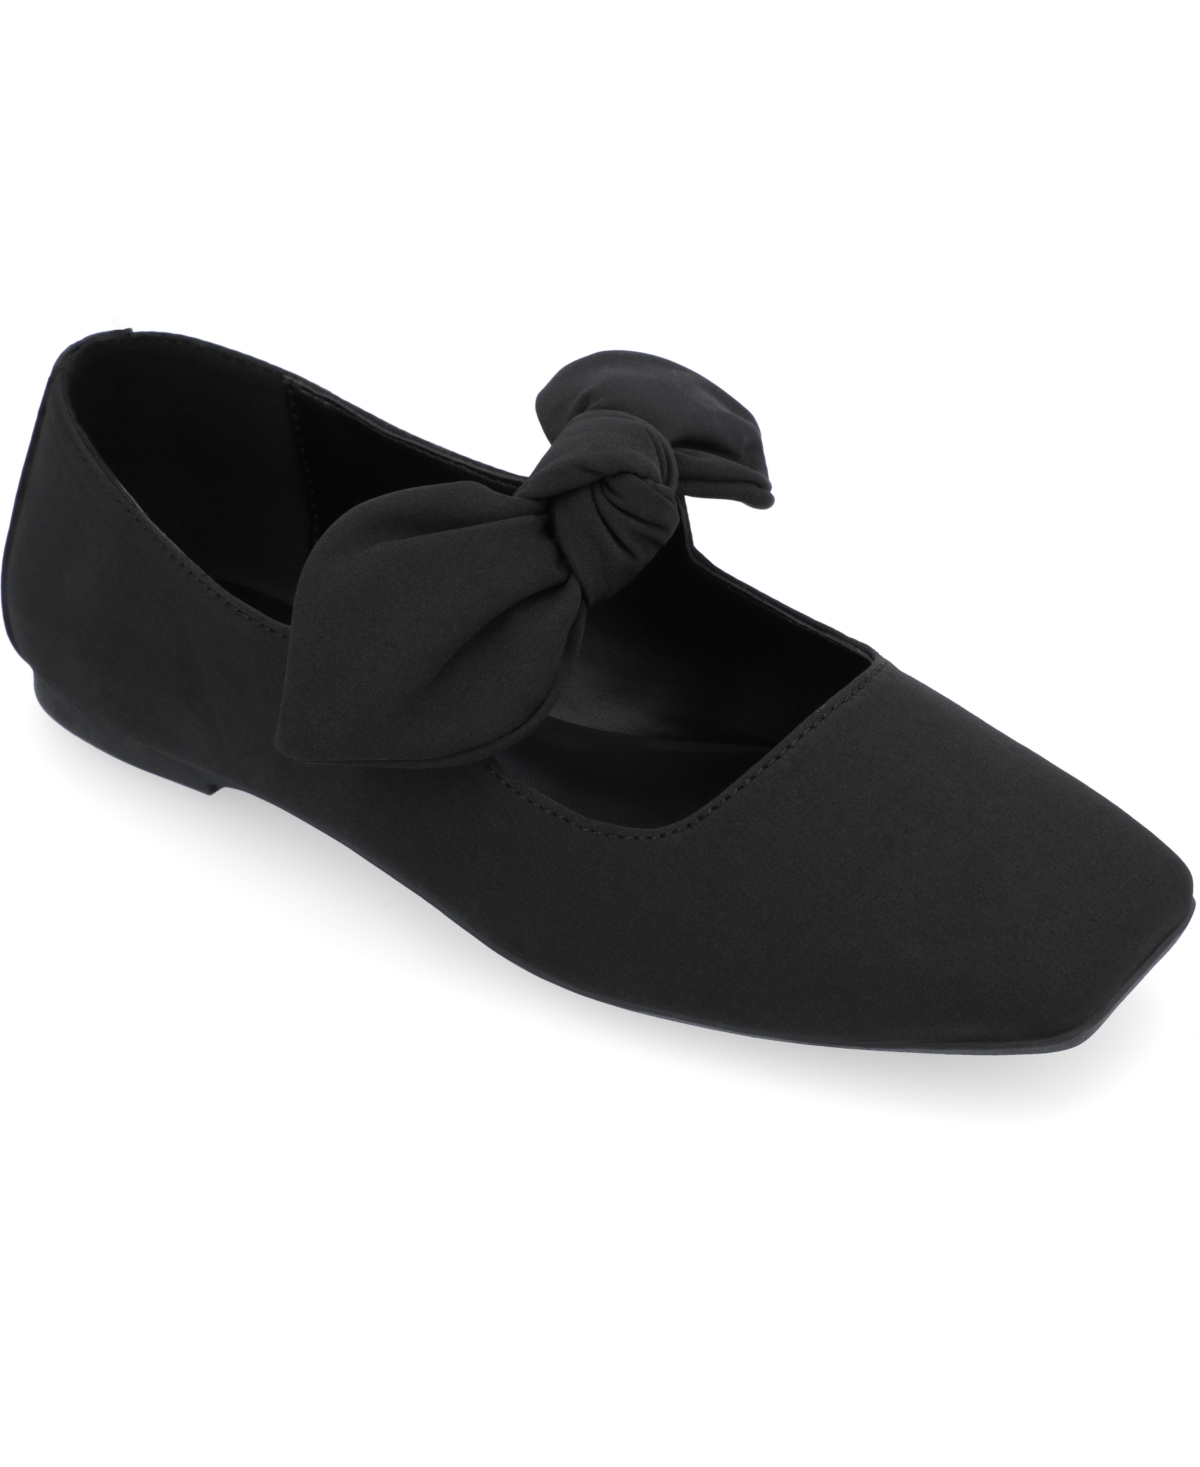 Downton Abbey Shoes- 5 Styles You Can Wear Journee Collection Womens Seralinn Bow Flats - Black $56.24 AT vintagedancer.com